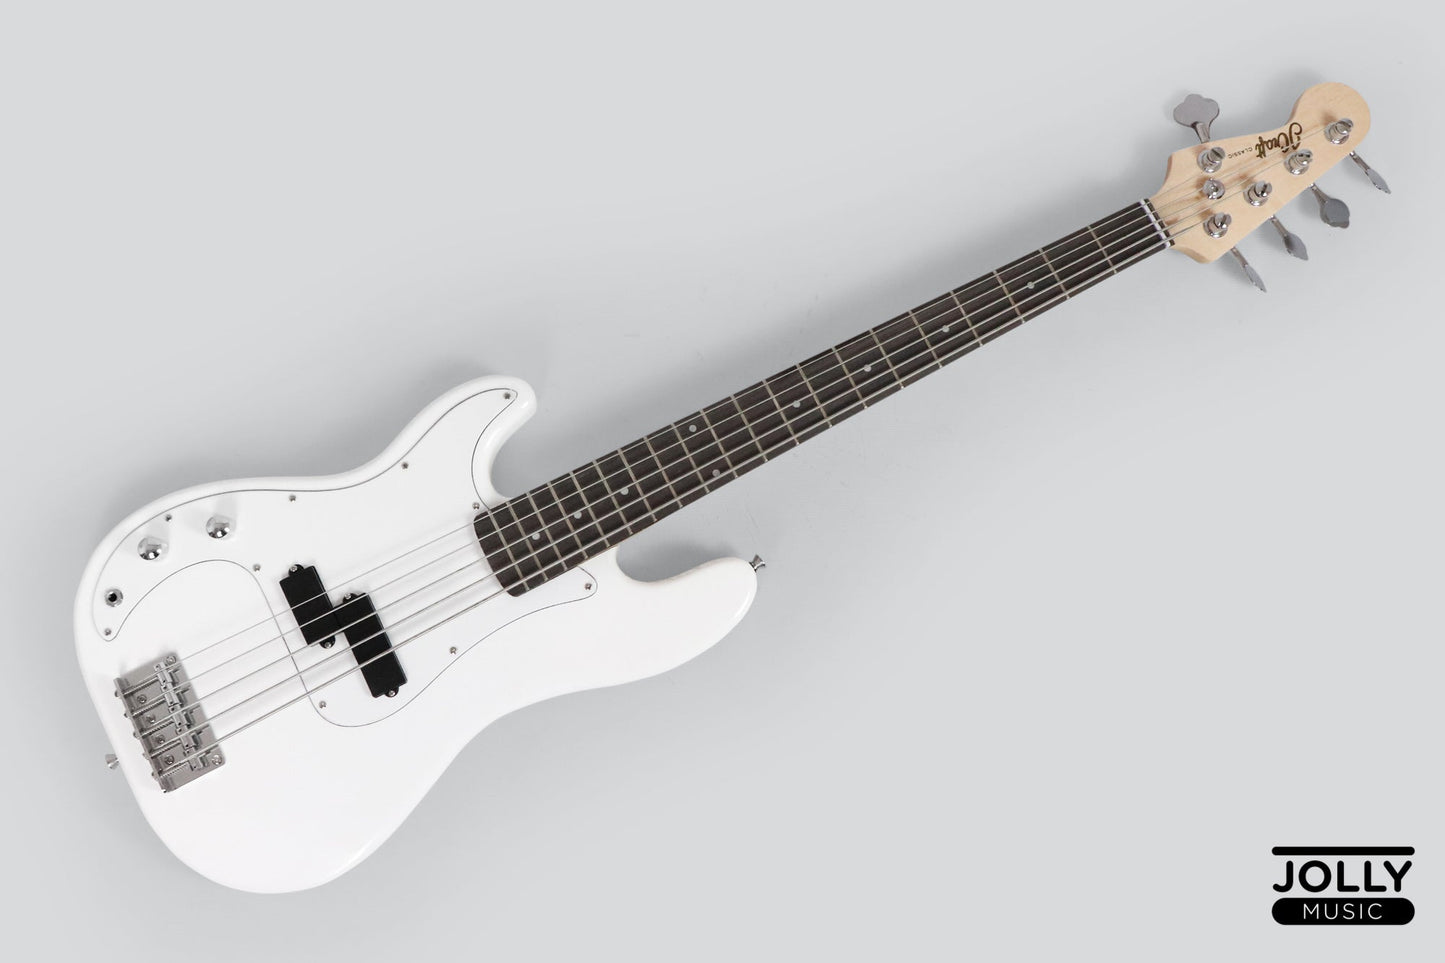 JCraft PB-1 Left Handed 5-String Electric Bass Guitar with Gigbag - Triple White